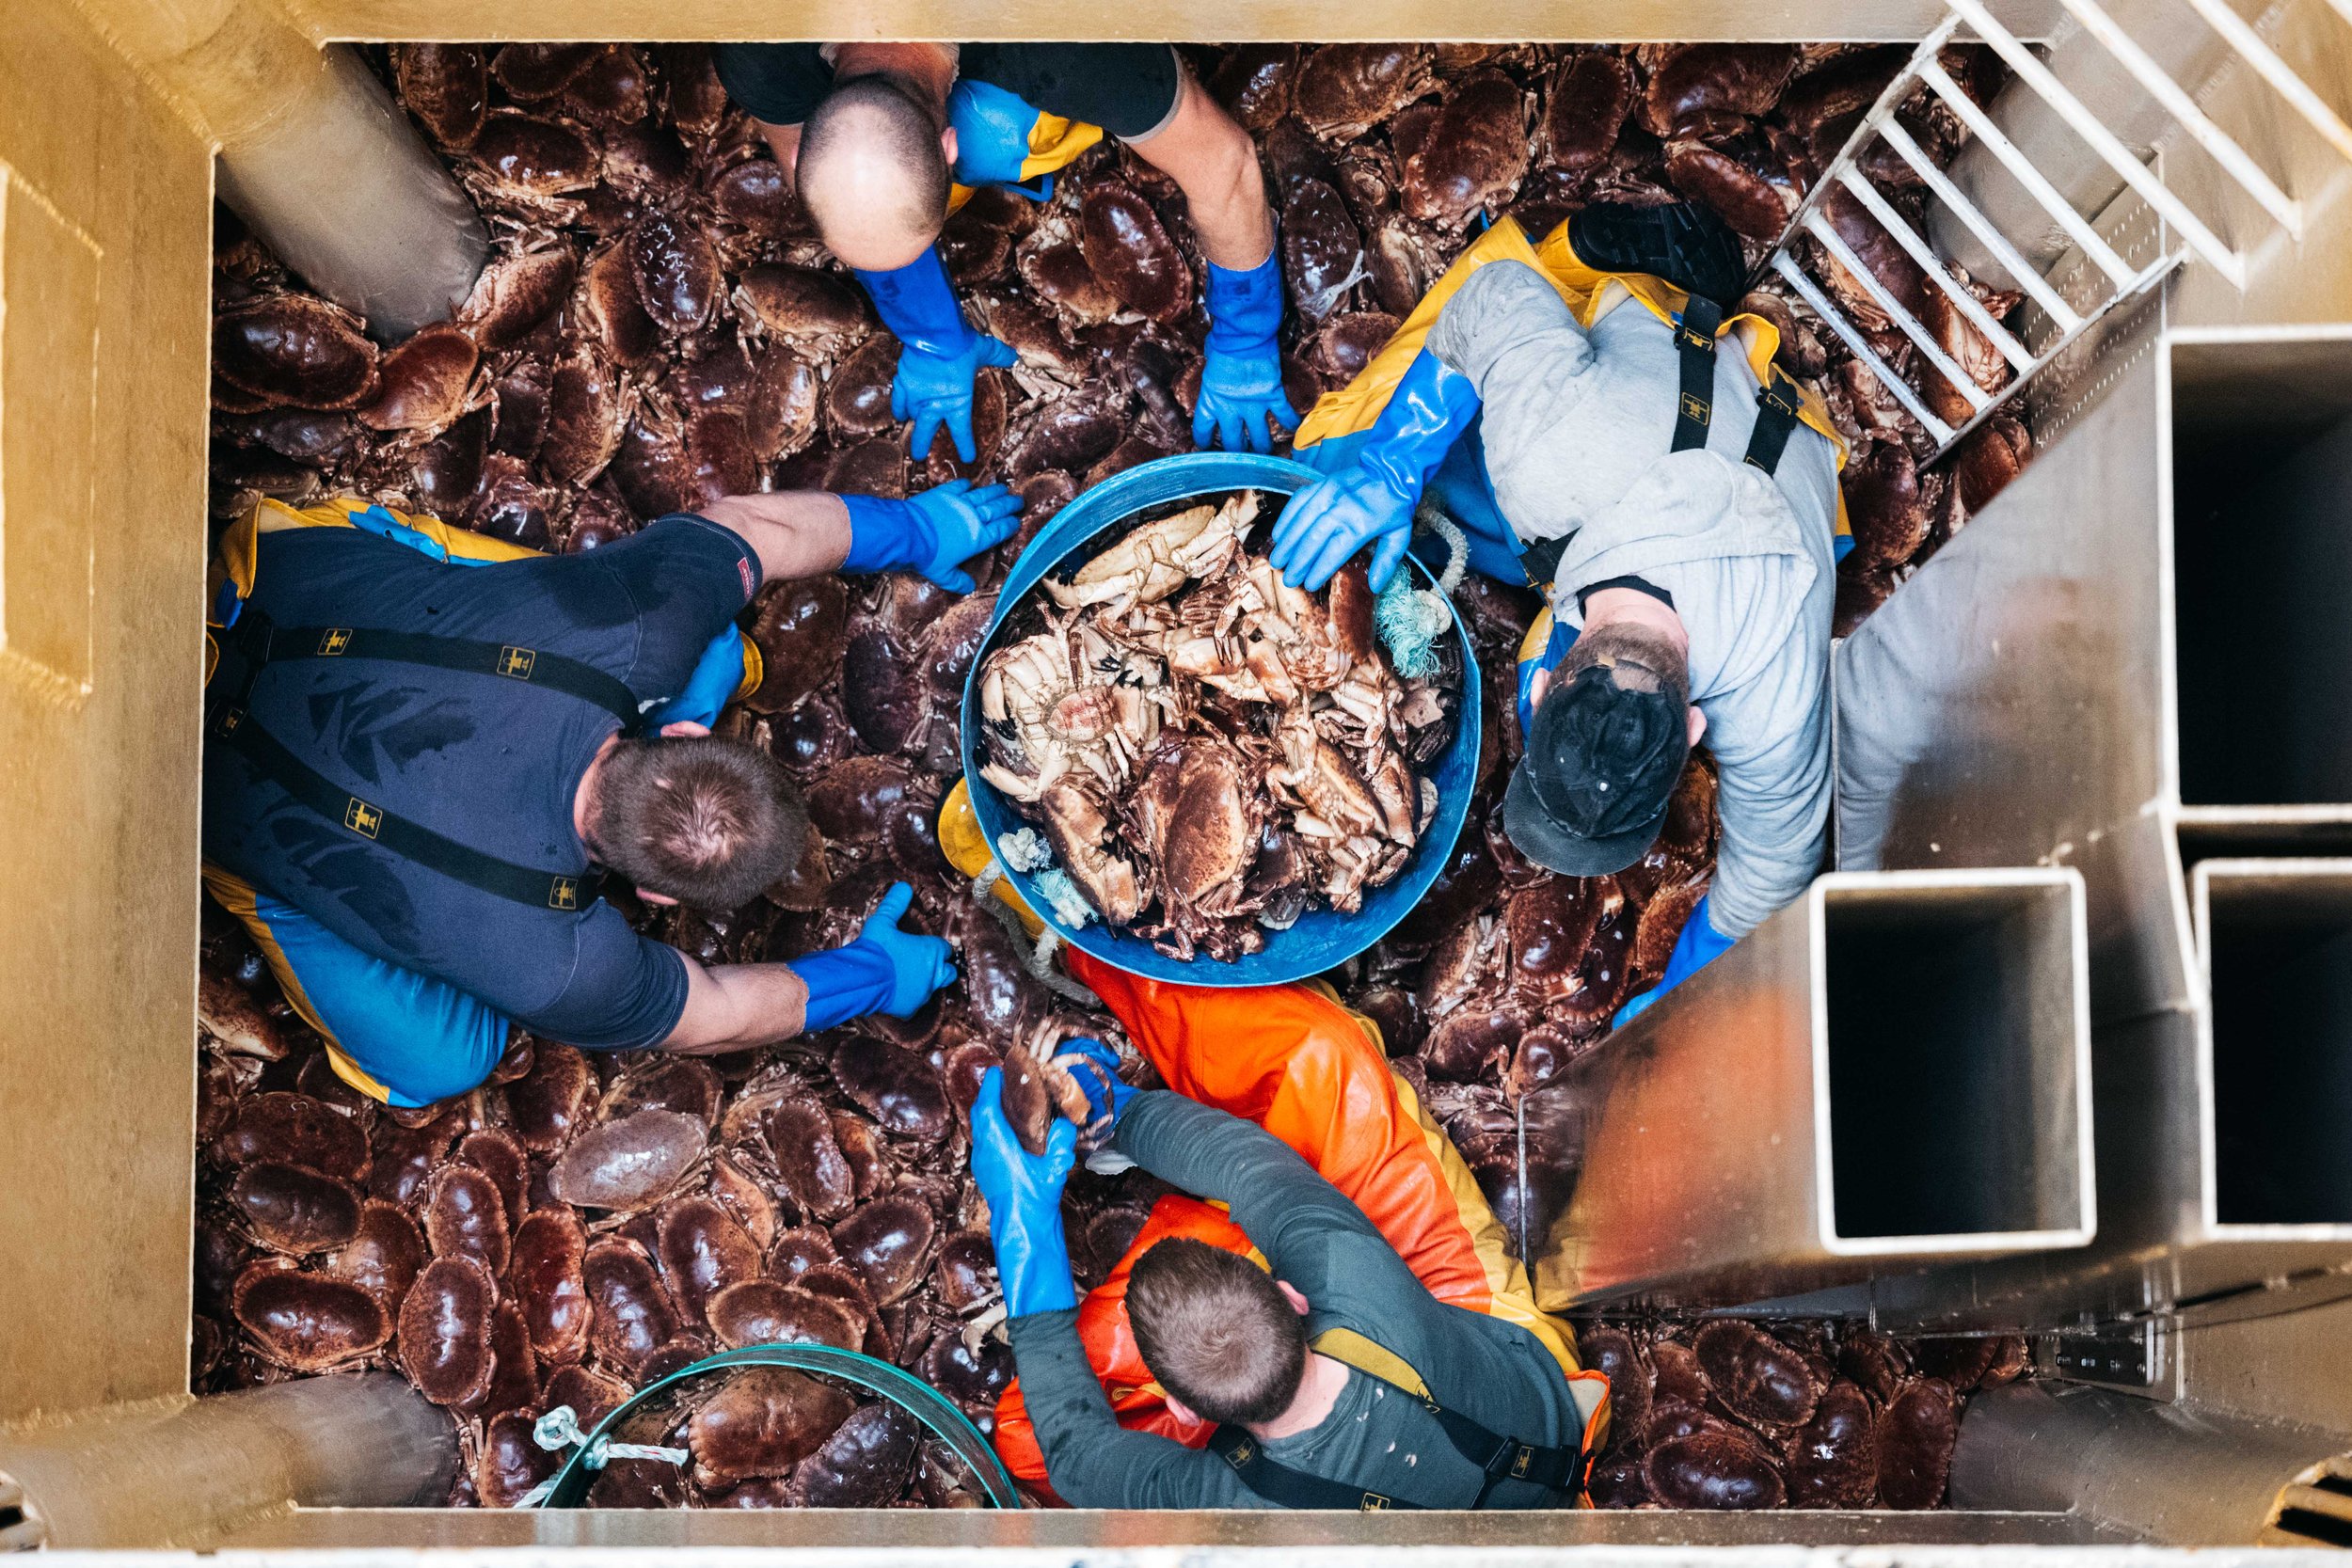  There were several seamen literally sitting on a mountain of crab filling the buckets. 